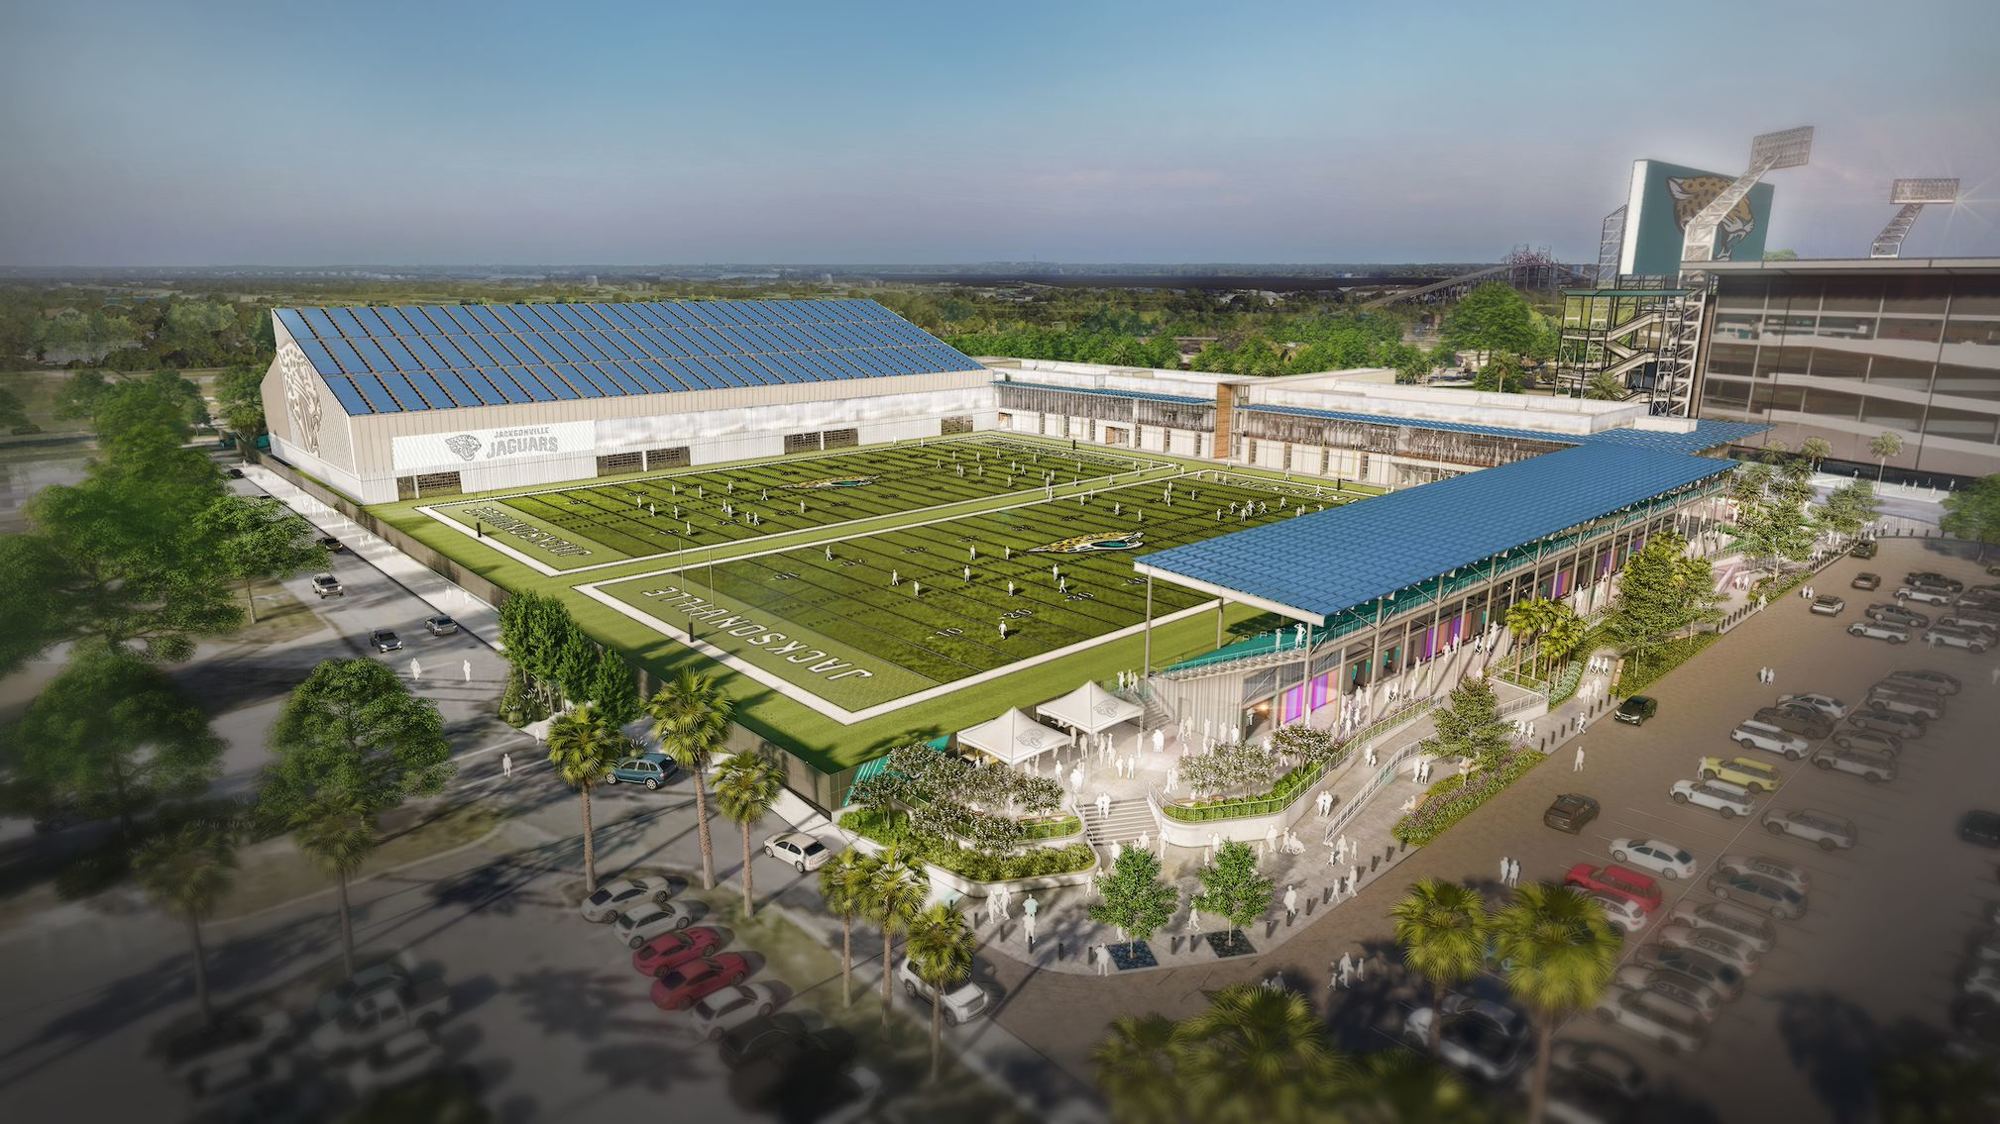 The Jacksonville Jaguars training and practice facility plans to open in 2023.